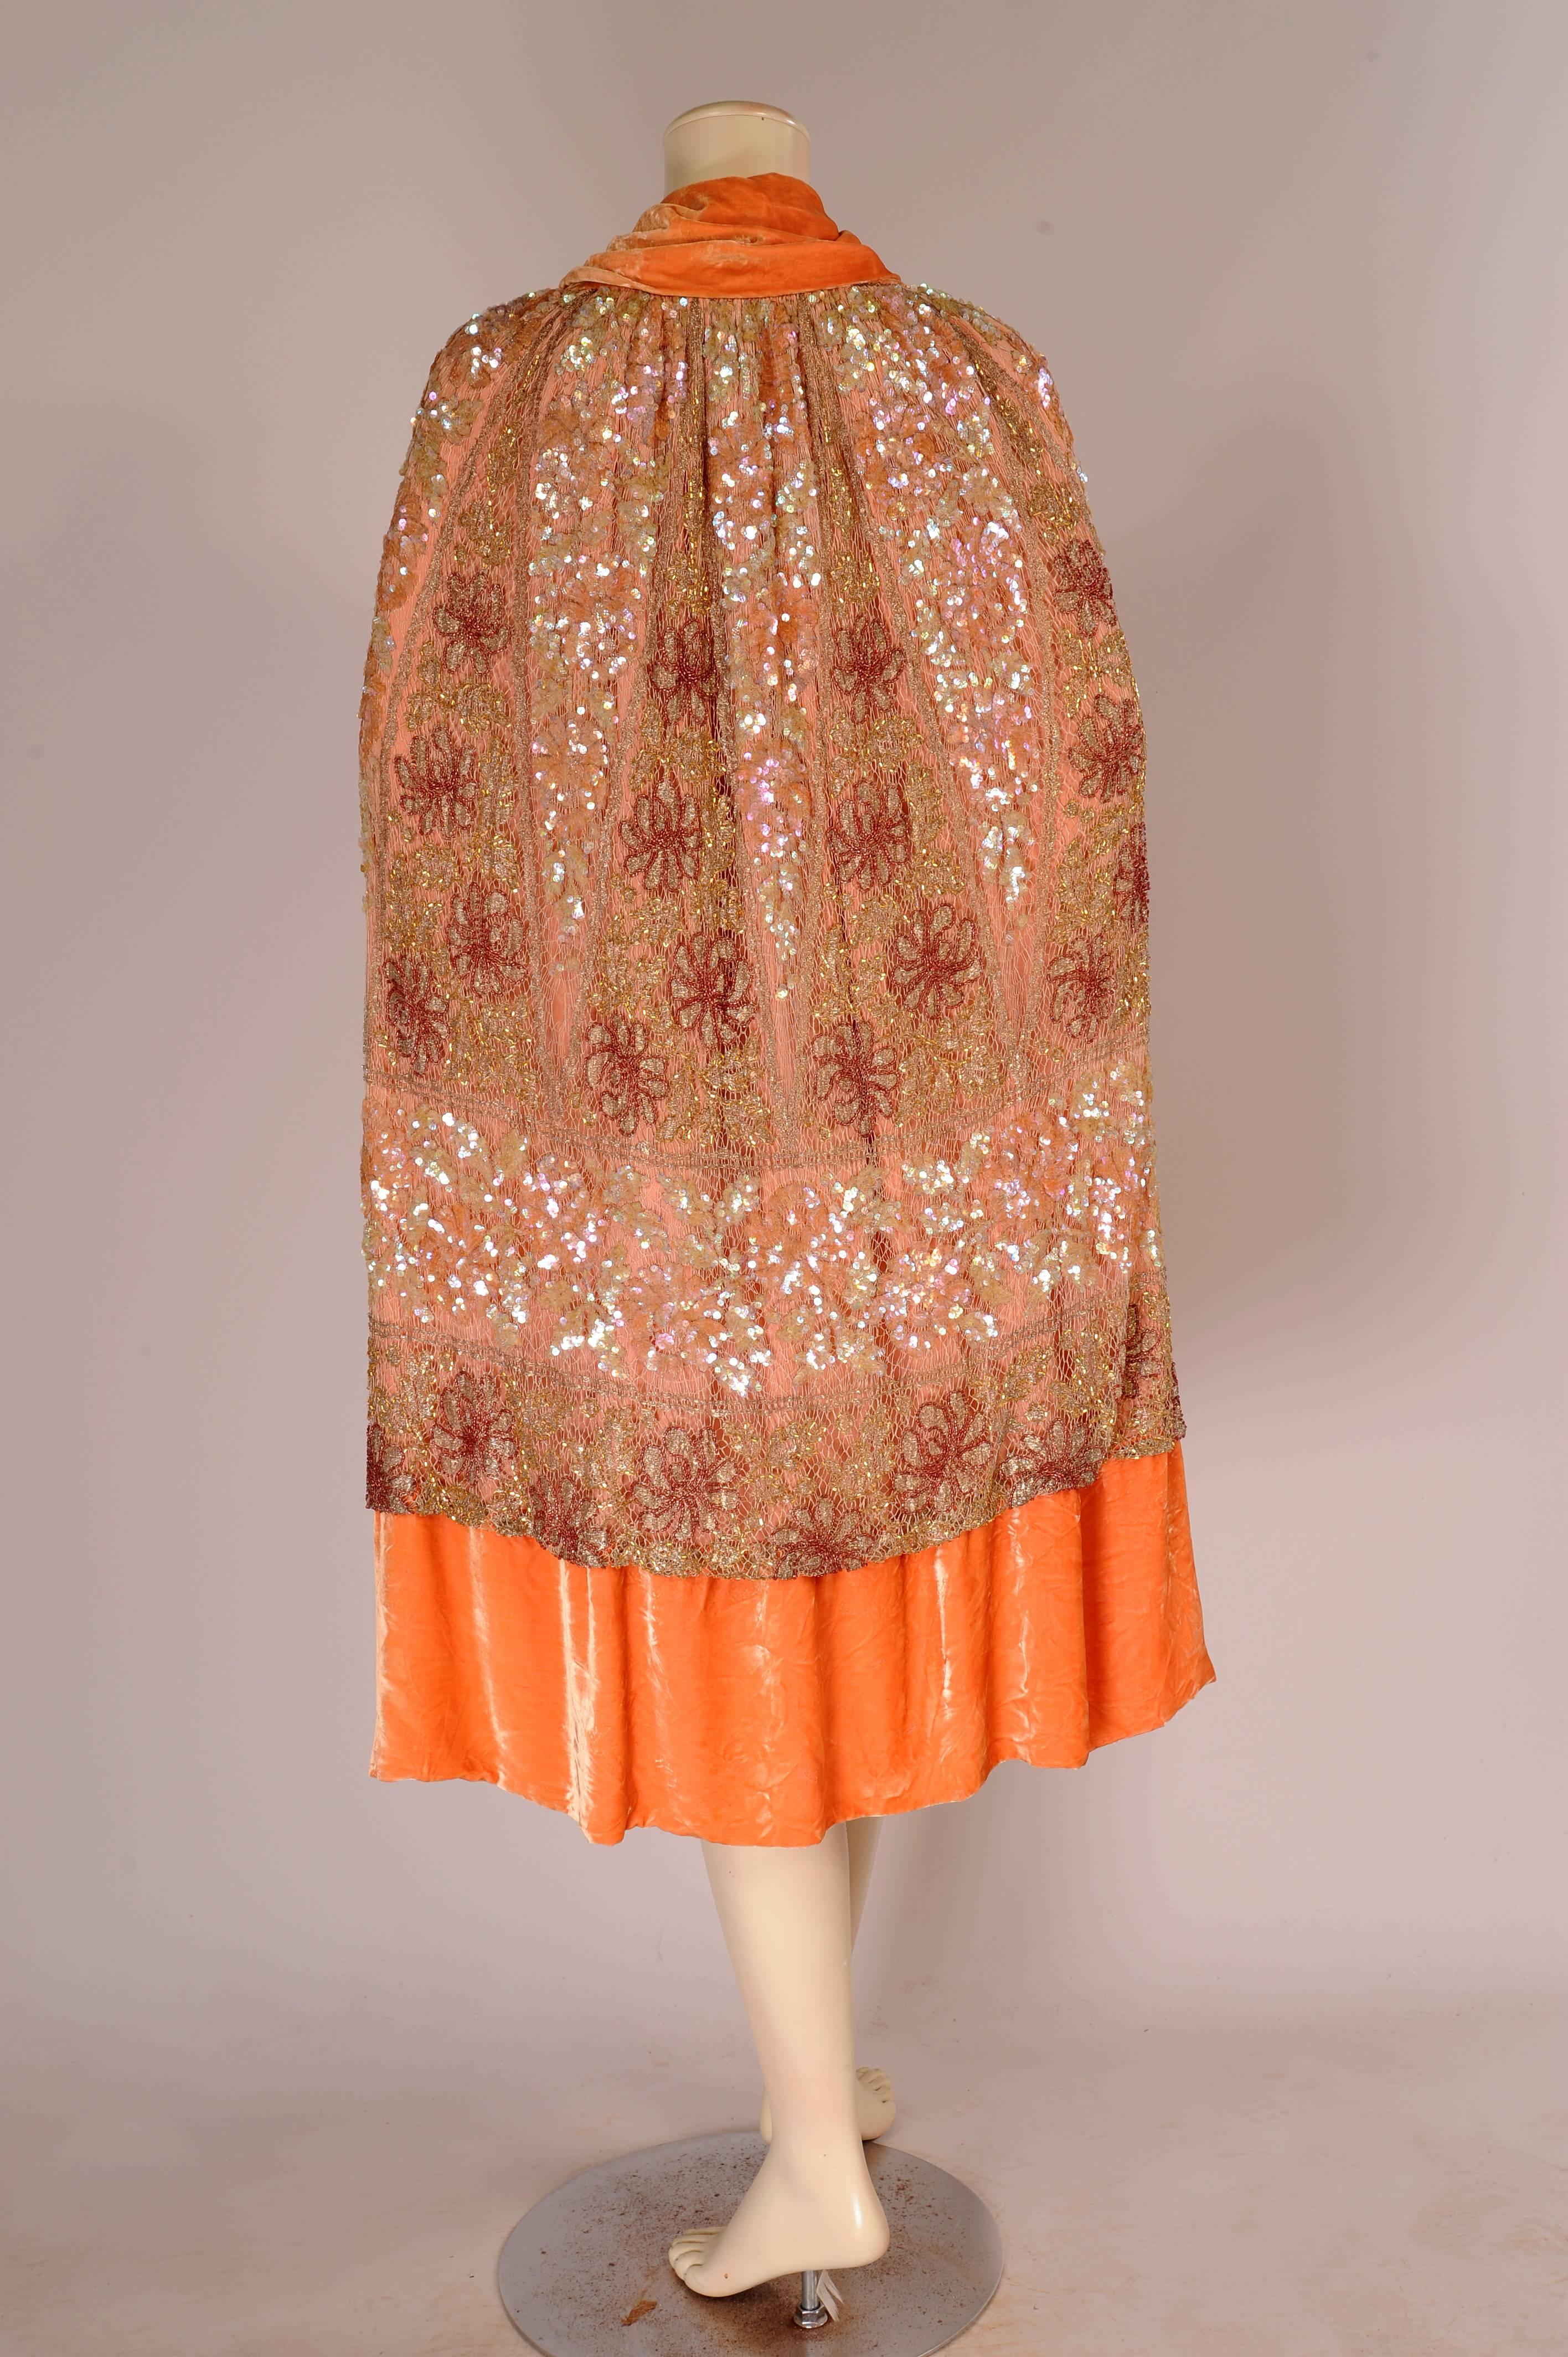 A striking example of 1920's clothing, this evening cape is made from apricot colored silk velvet. It has a large decorative panel of beadwork and metallic lace covering almost all of the velvet except for the border and scarf tie at the neck. The